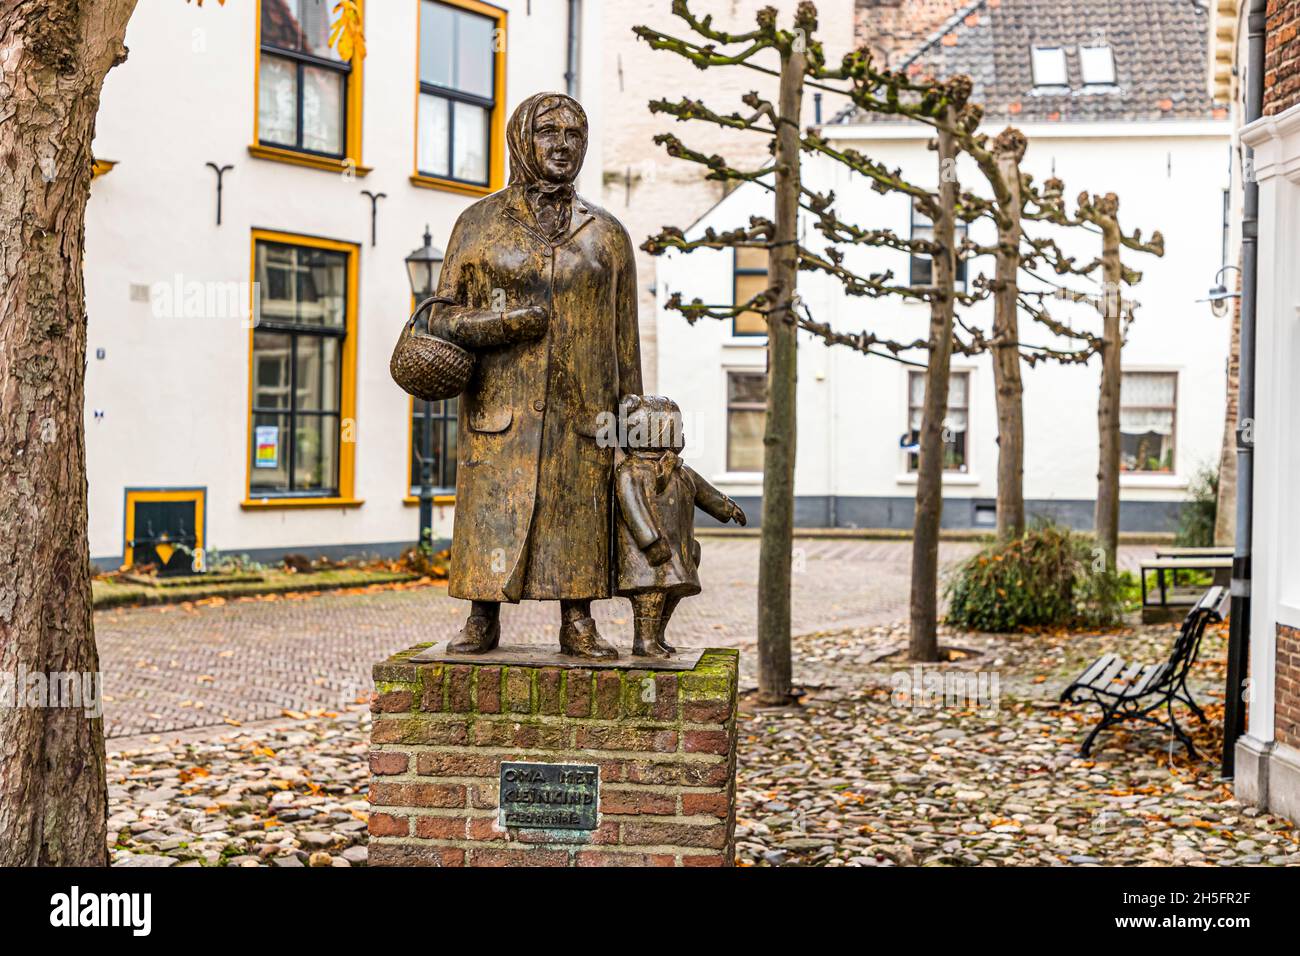 Statue 'Grandma with toddler' by Theo Renirie in Doesburg, Netherlands Stock Photo